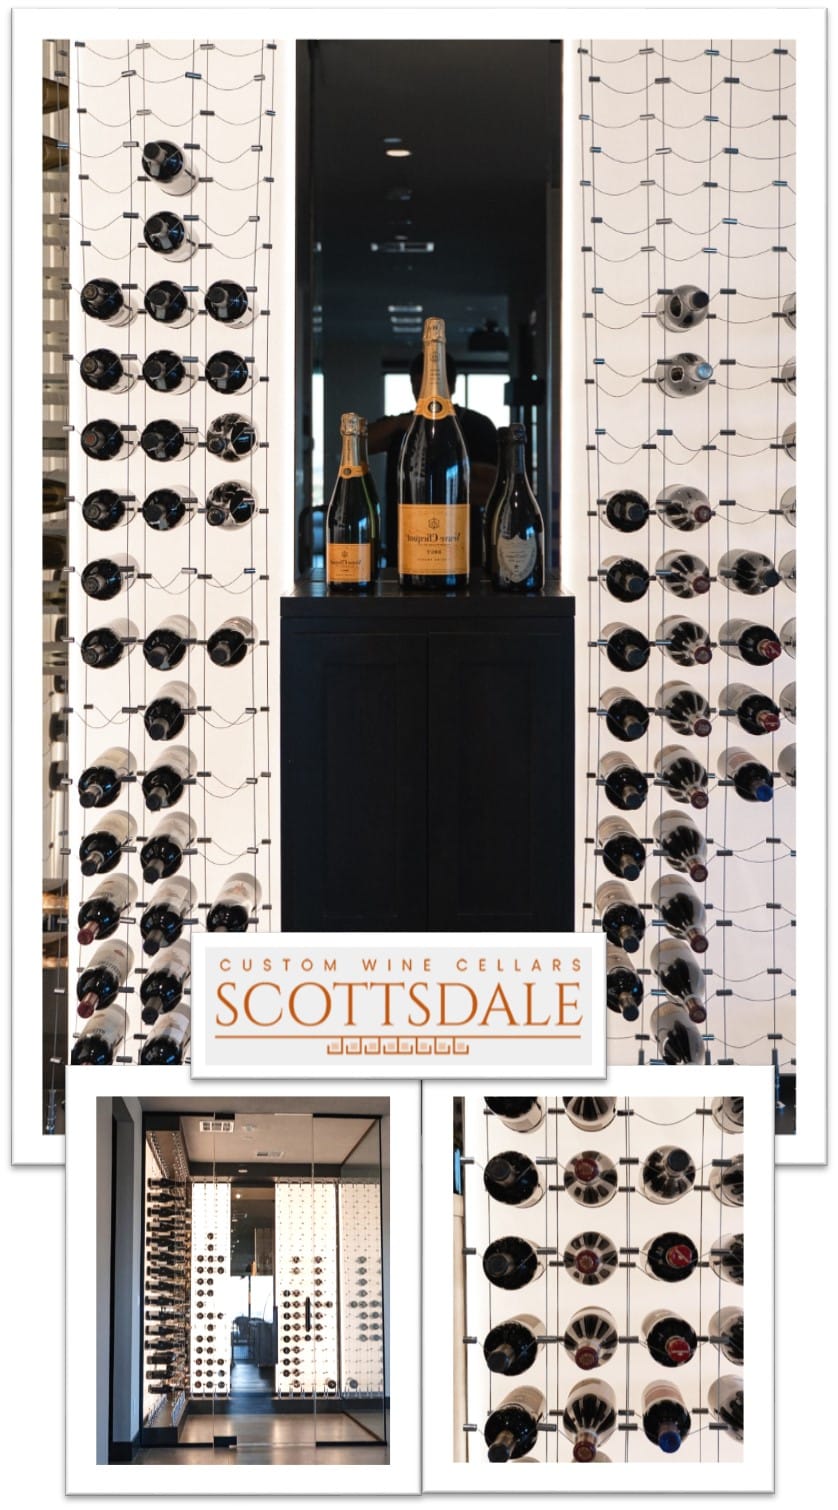 Cable Wine Displays are Widely Used for Building Modern Wine Cellars